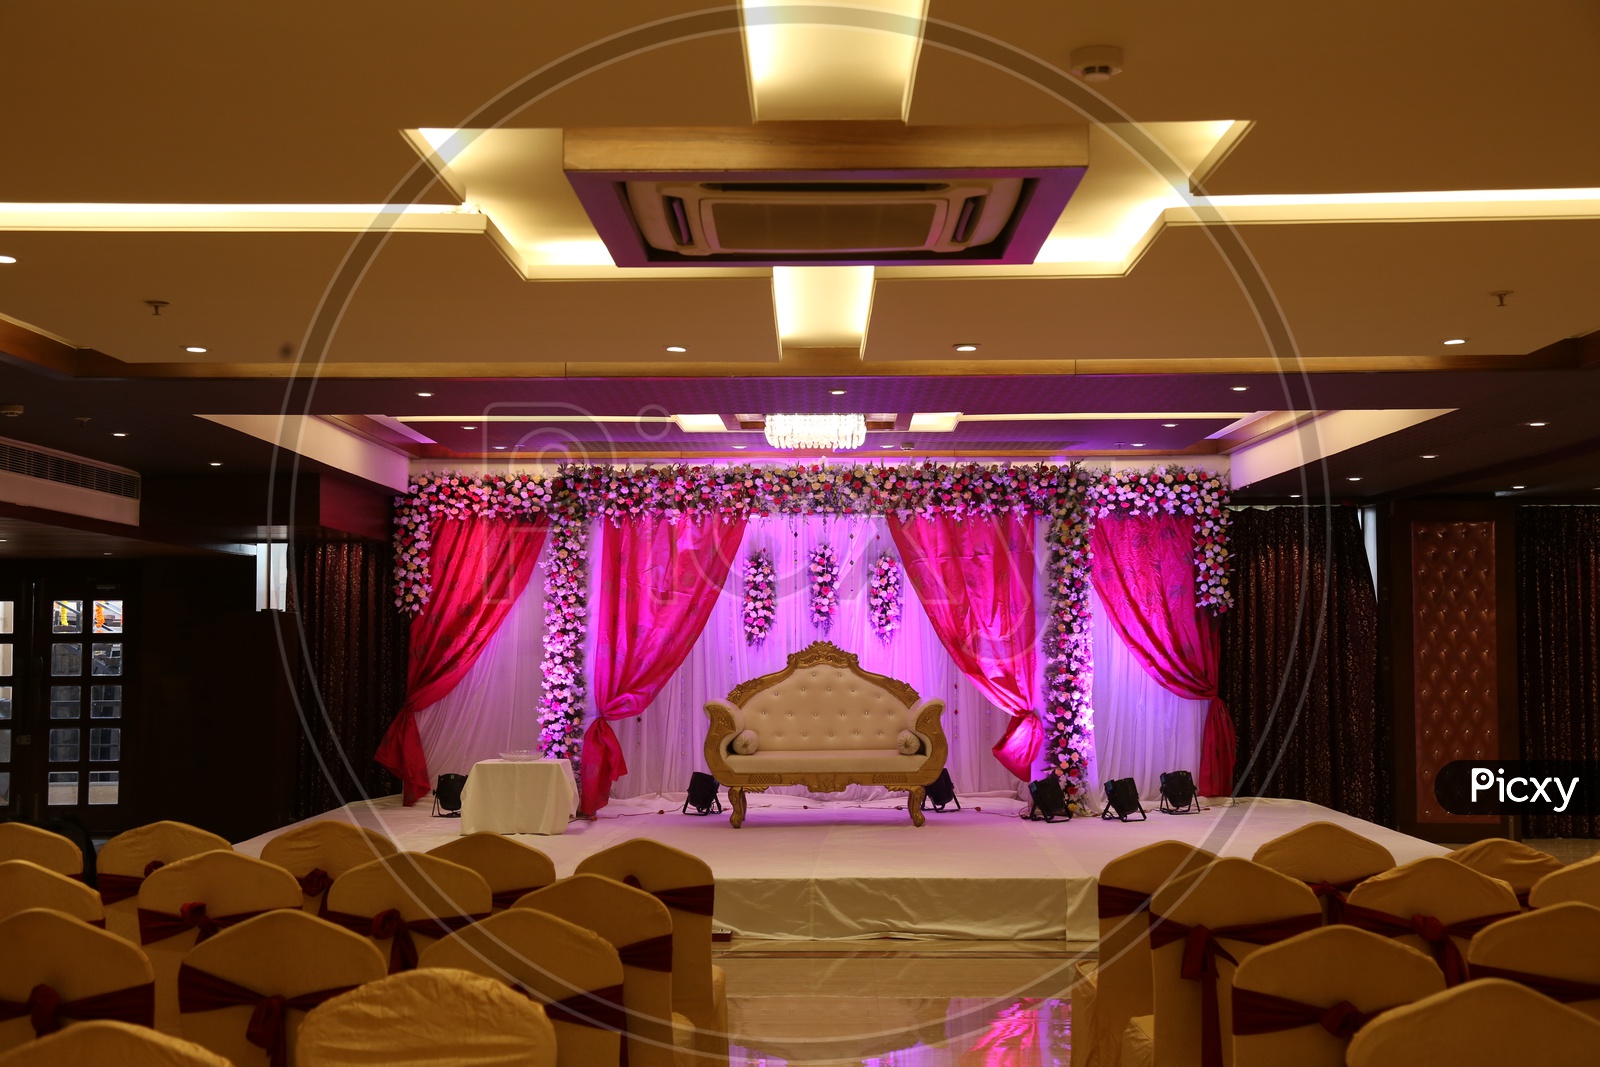 A Decorted stage in a functinoal hall with central A.C